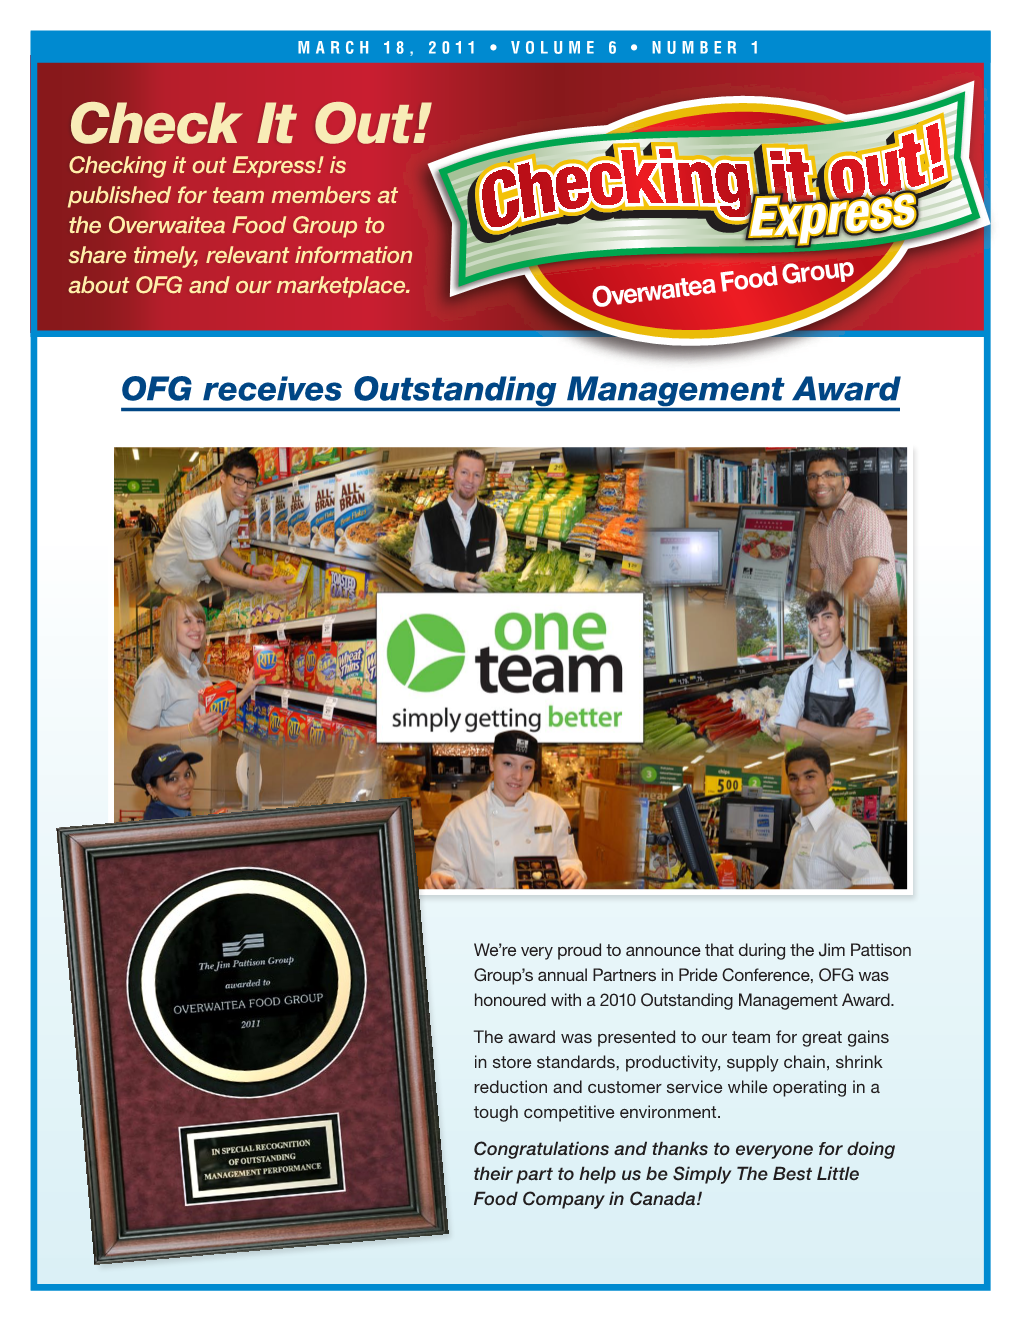 Check It Out! Checking It out Express! Is Published for Team Members at the Overwaitea Food Group to Share Timely, Relevant Information About OFG and Our Marketplace